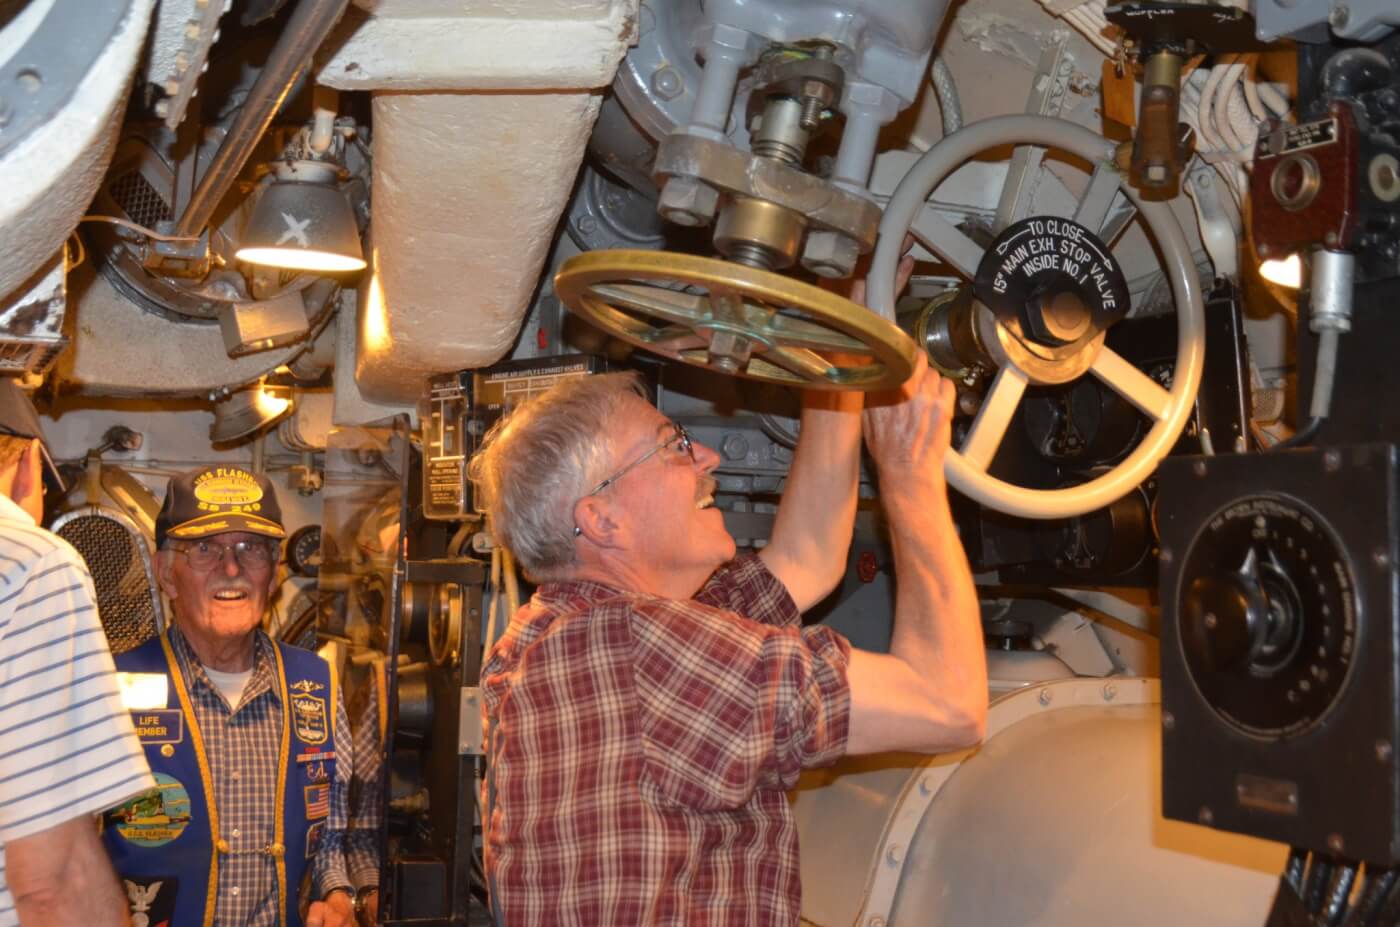  Charles Butcher, Chief of the Boat, opening the exhaust valve prior to starting the motor